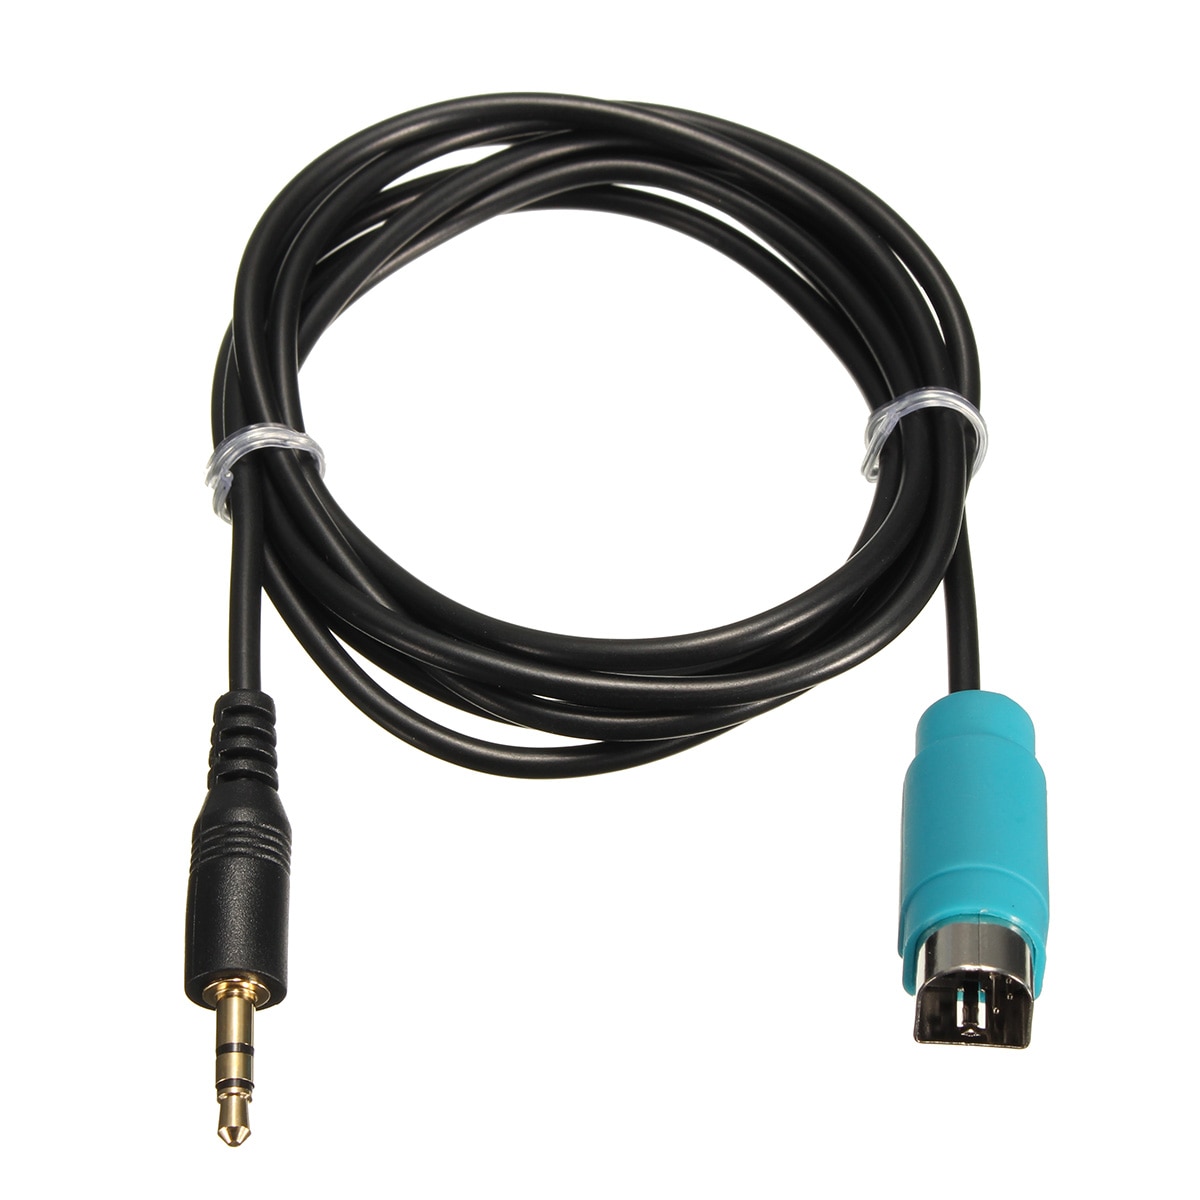 Newest For Alpine AUX 3.5mm Jack Input Converster Cable Adaptor KCE-236B For MP3